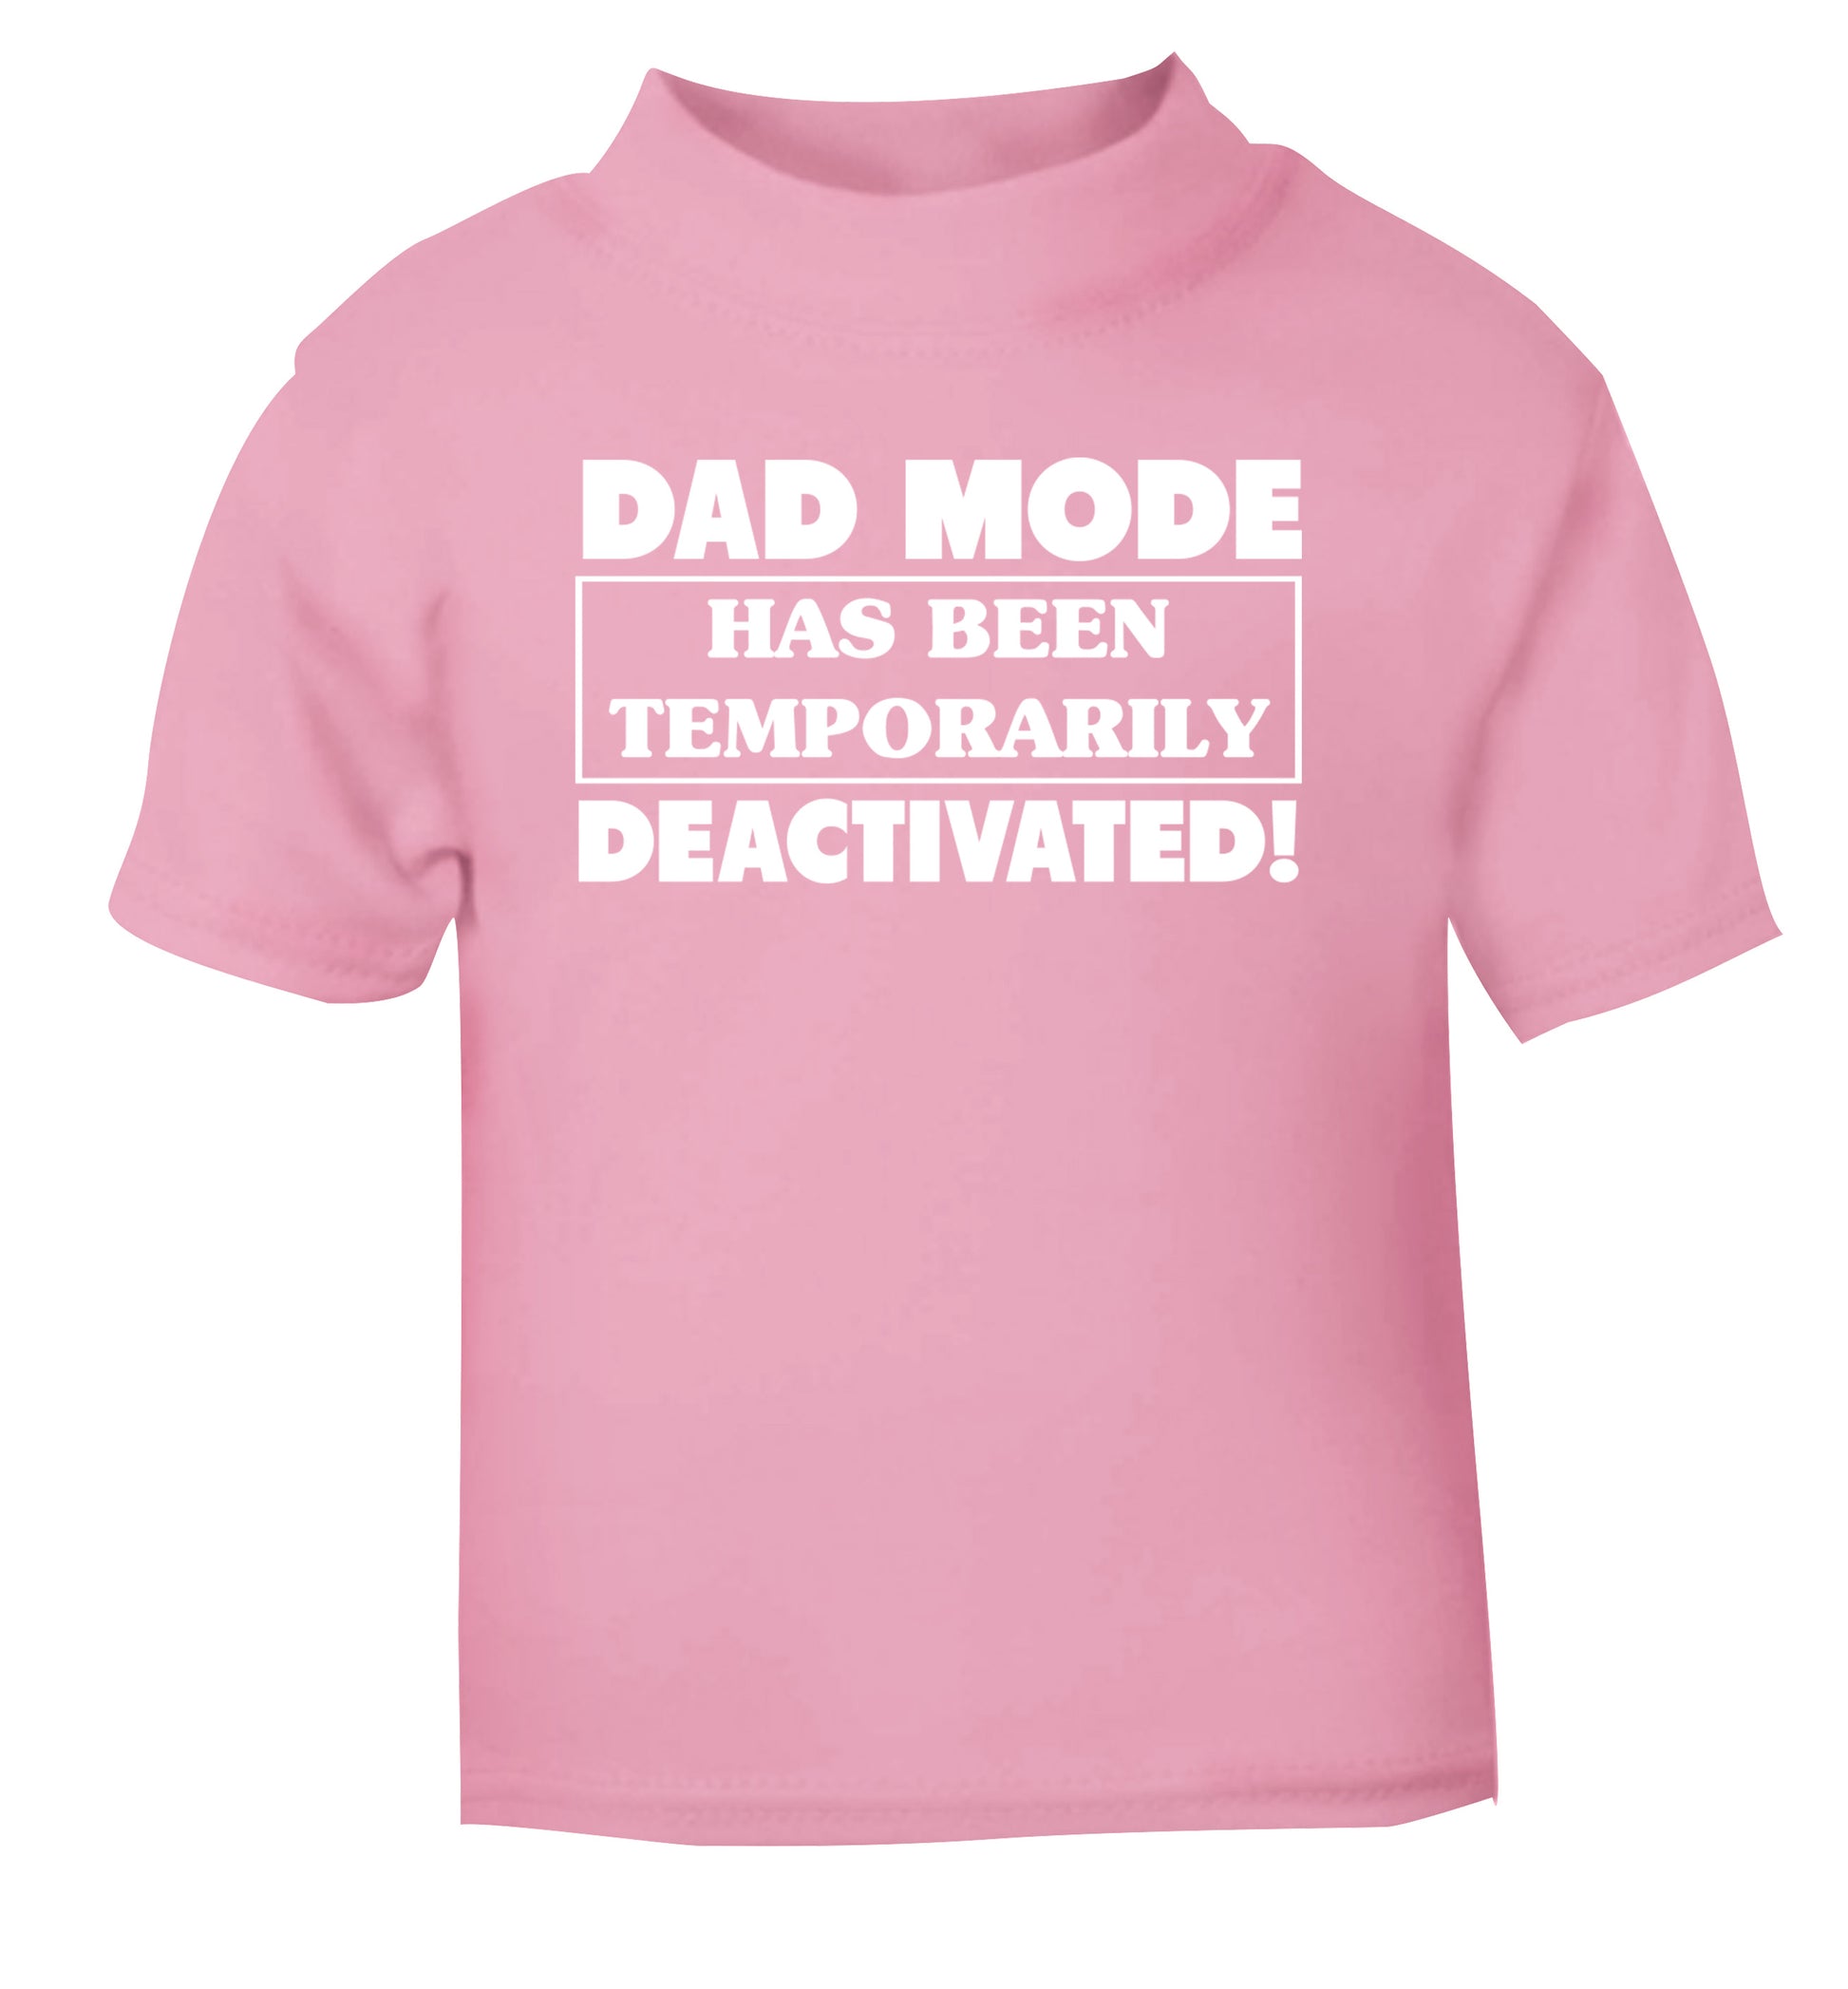 Dad mode has been temporarily deactivated! light pink Baby Toddler Tshirt 2 Years